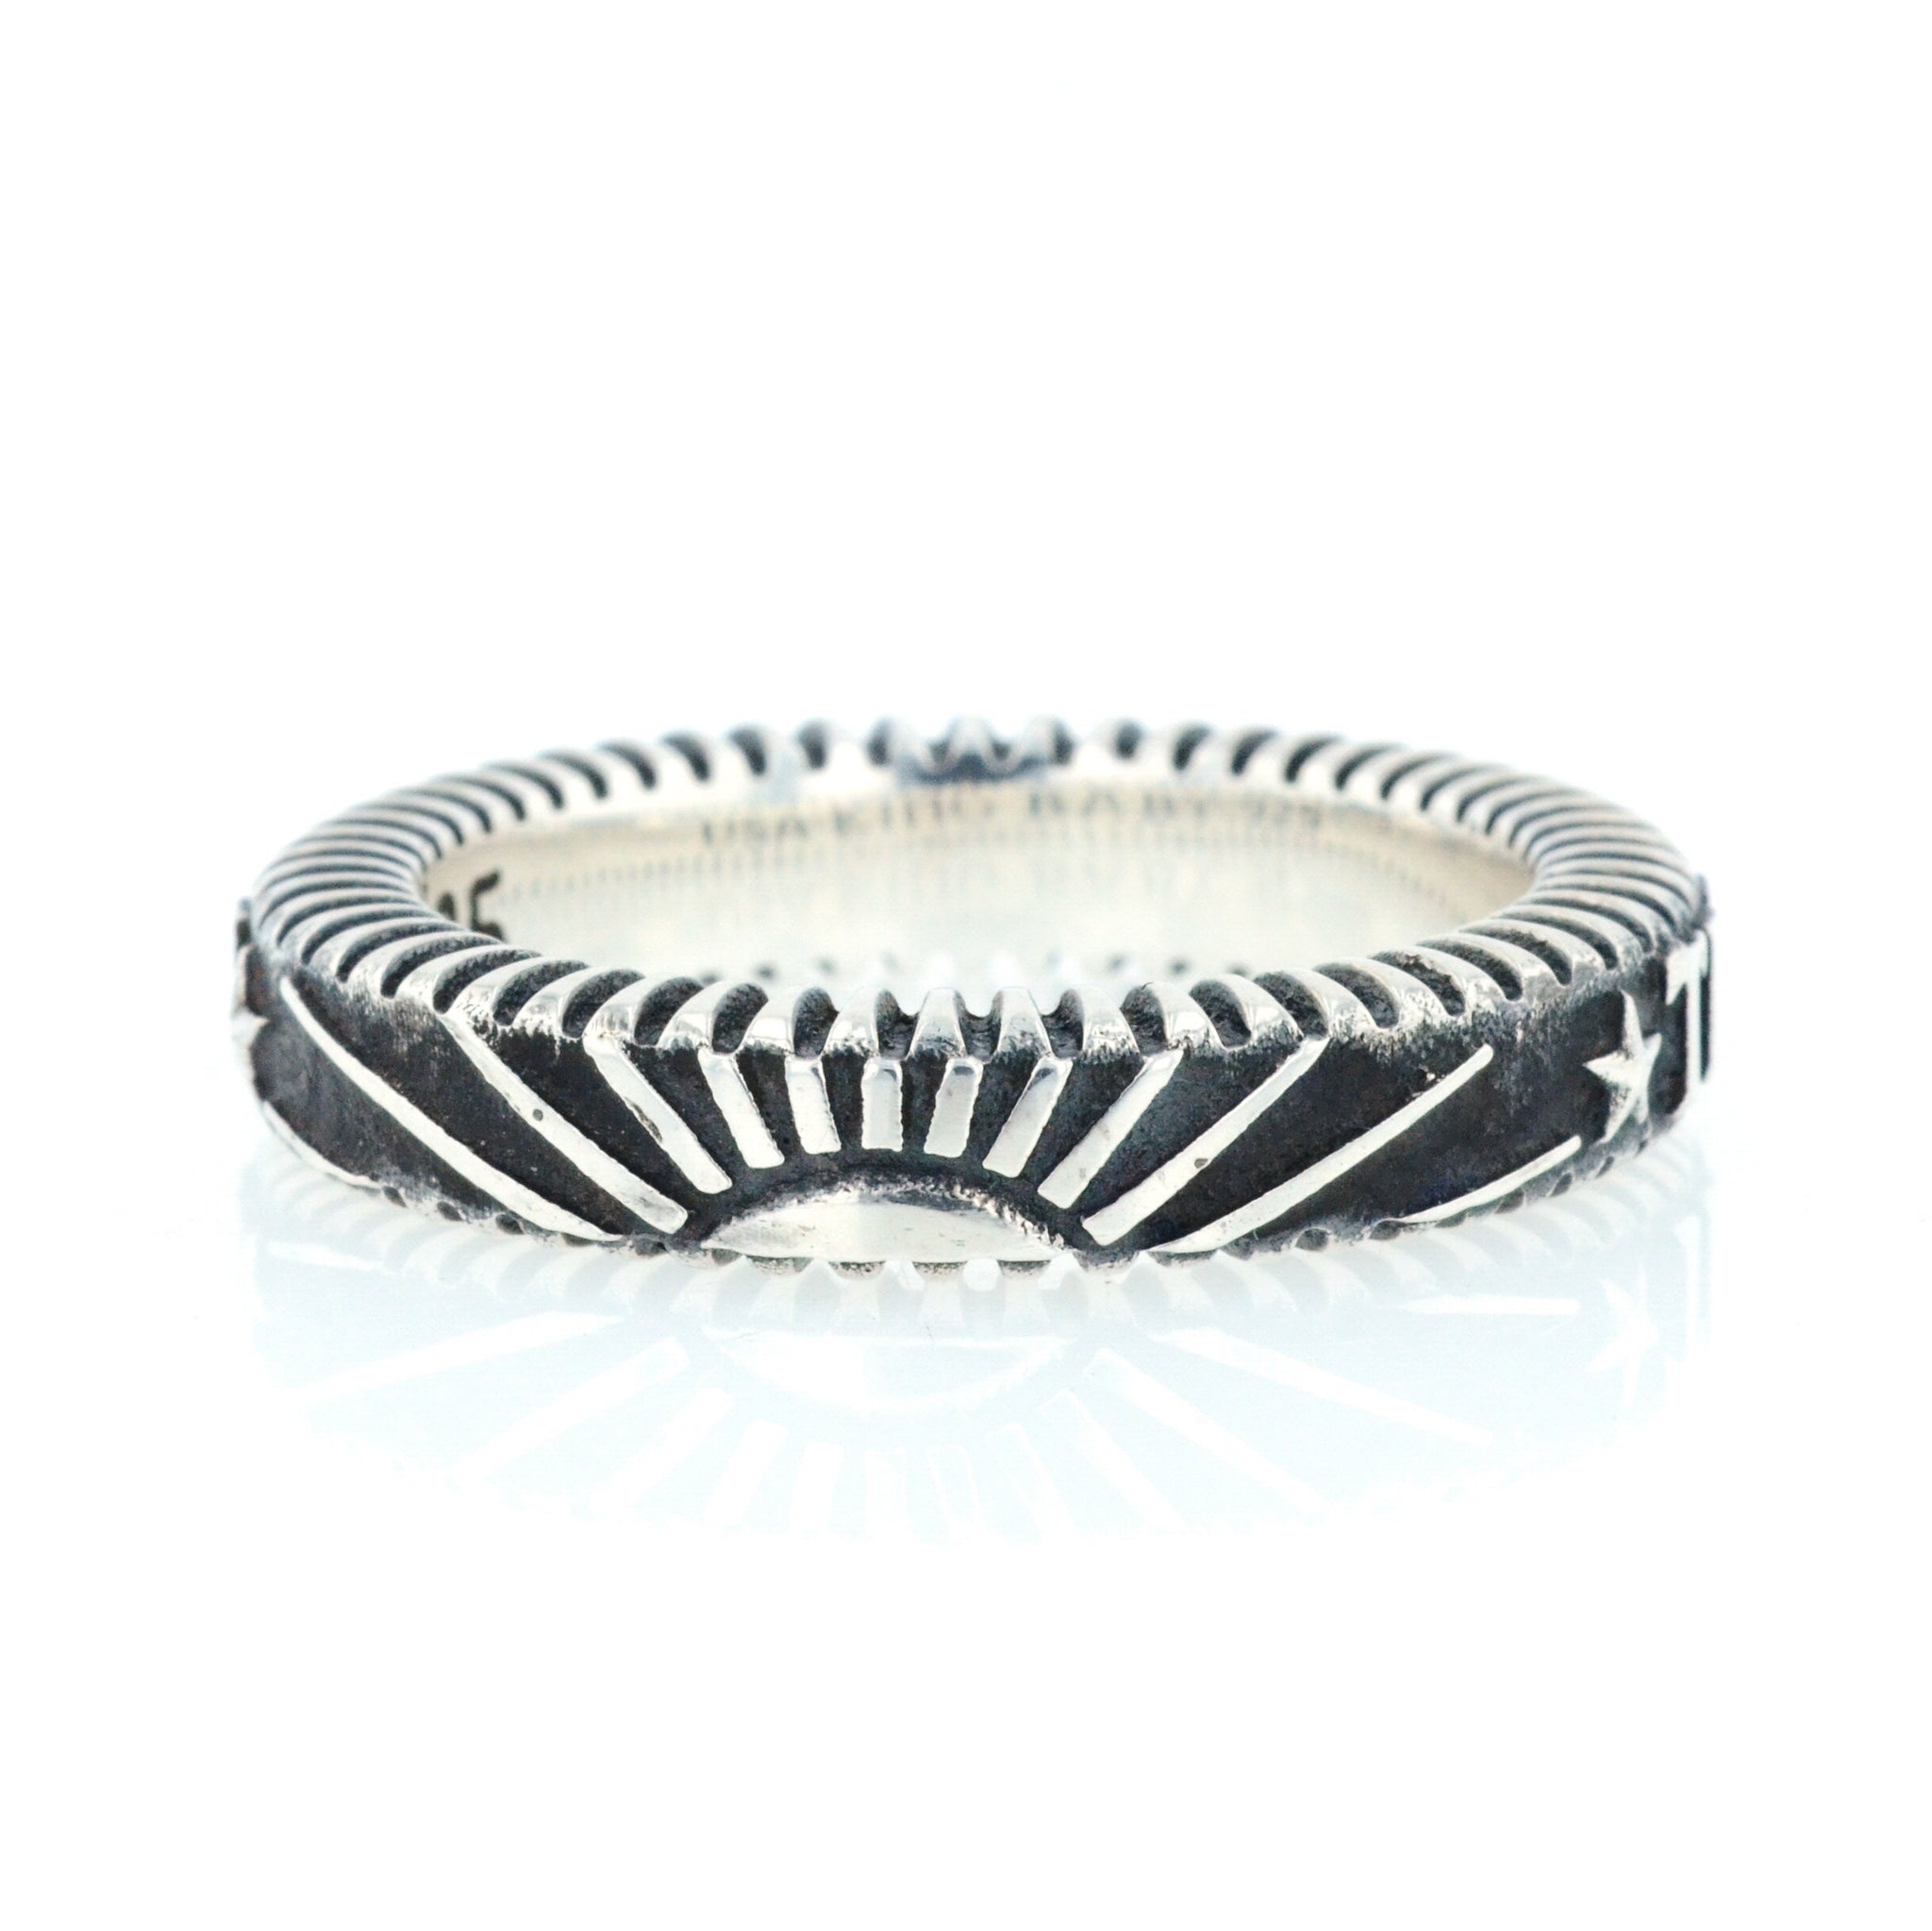 King Baby Truth Stackable Ring